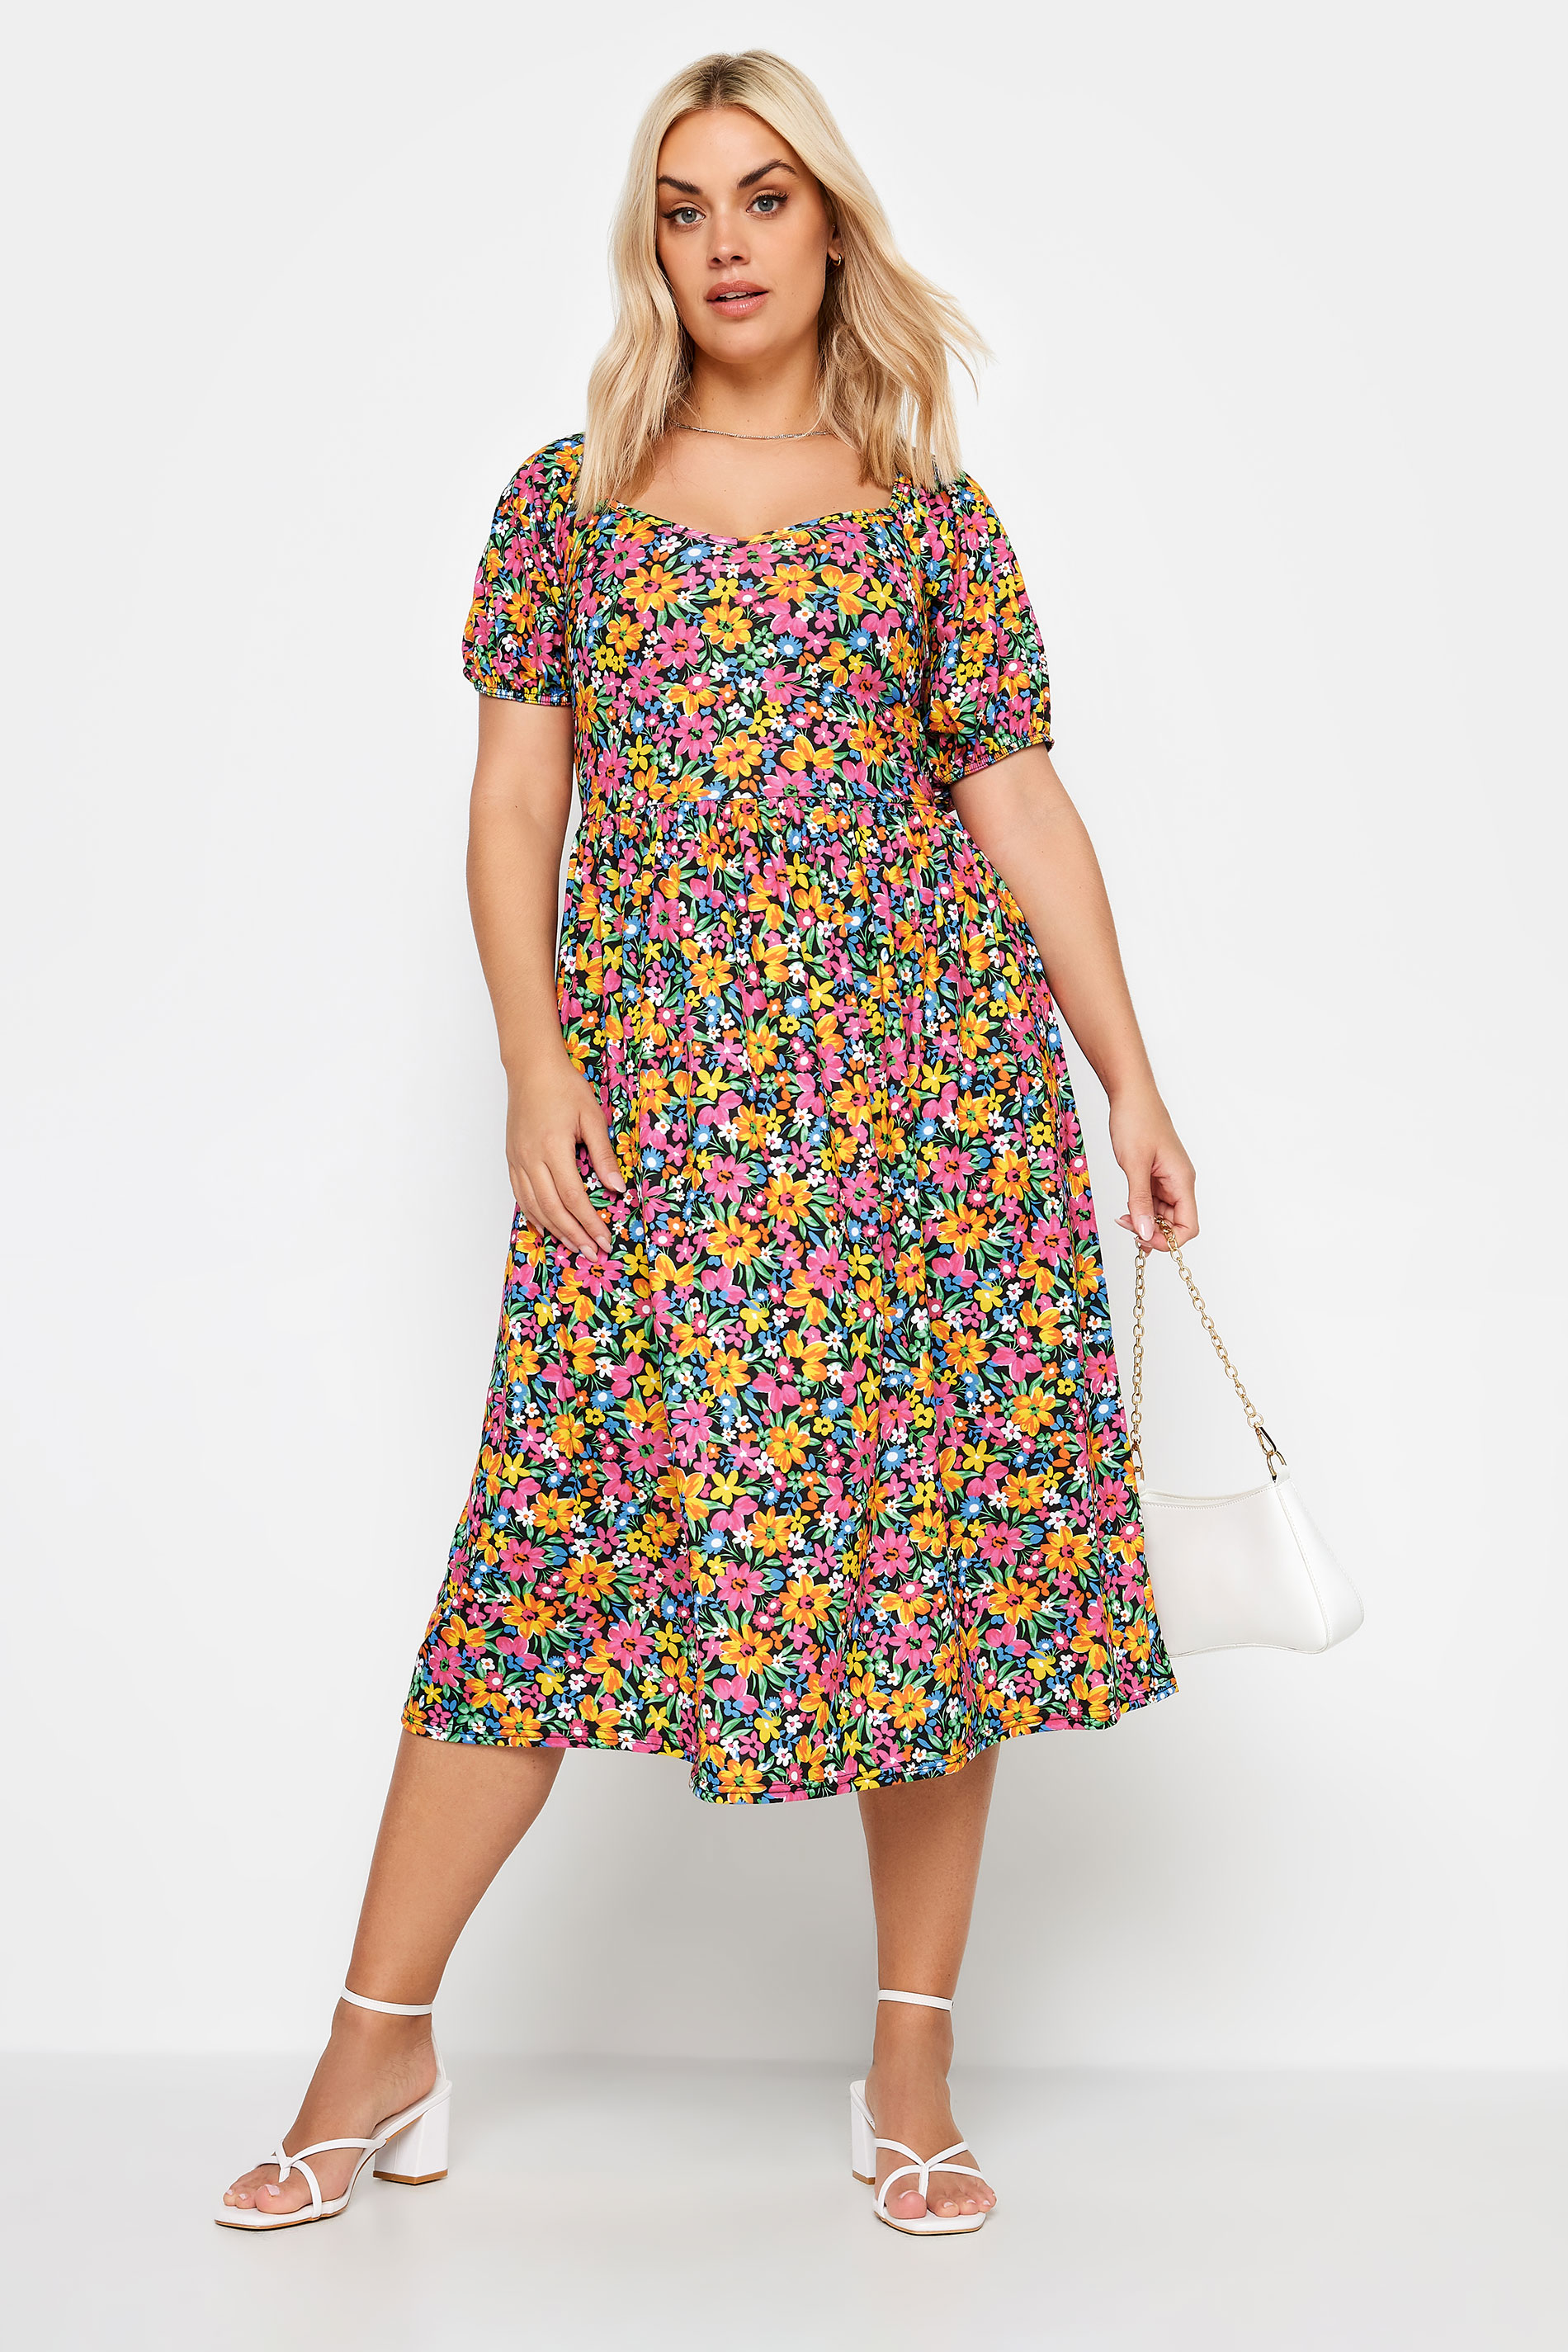 LIMITED COLLECTION Curve Plus Size Yellow Floral Midaxi Dress | Yours Clothing  1